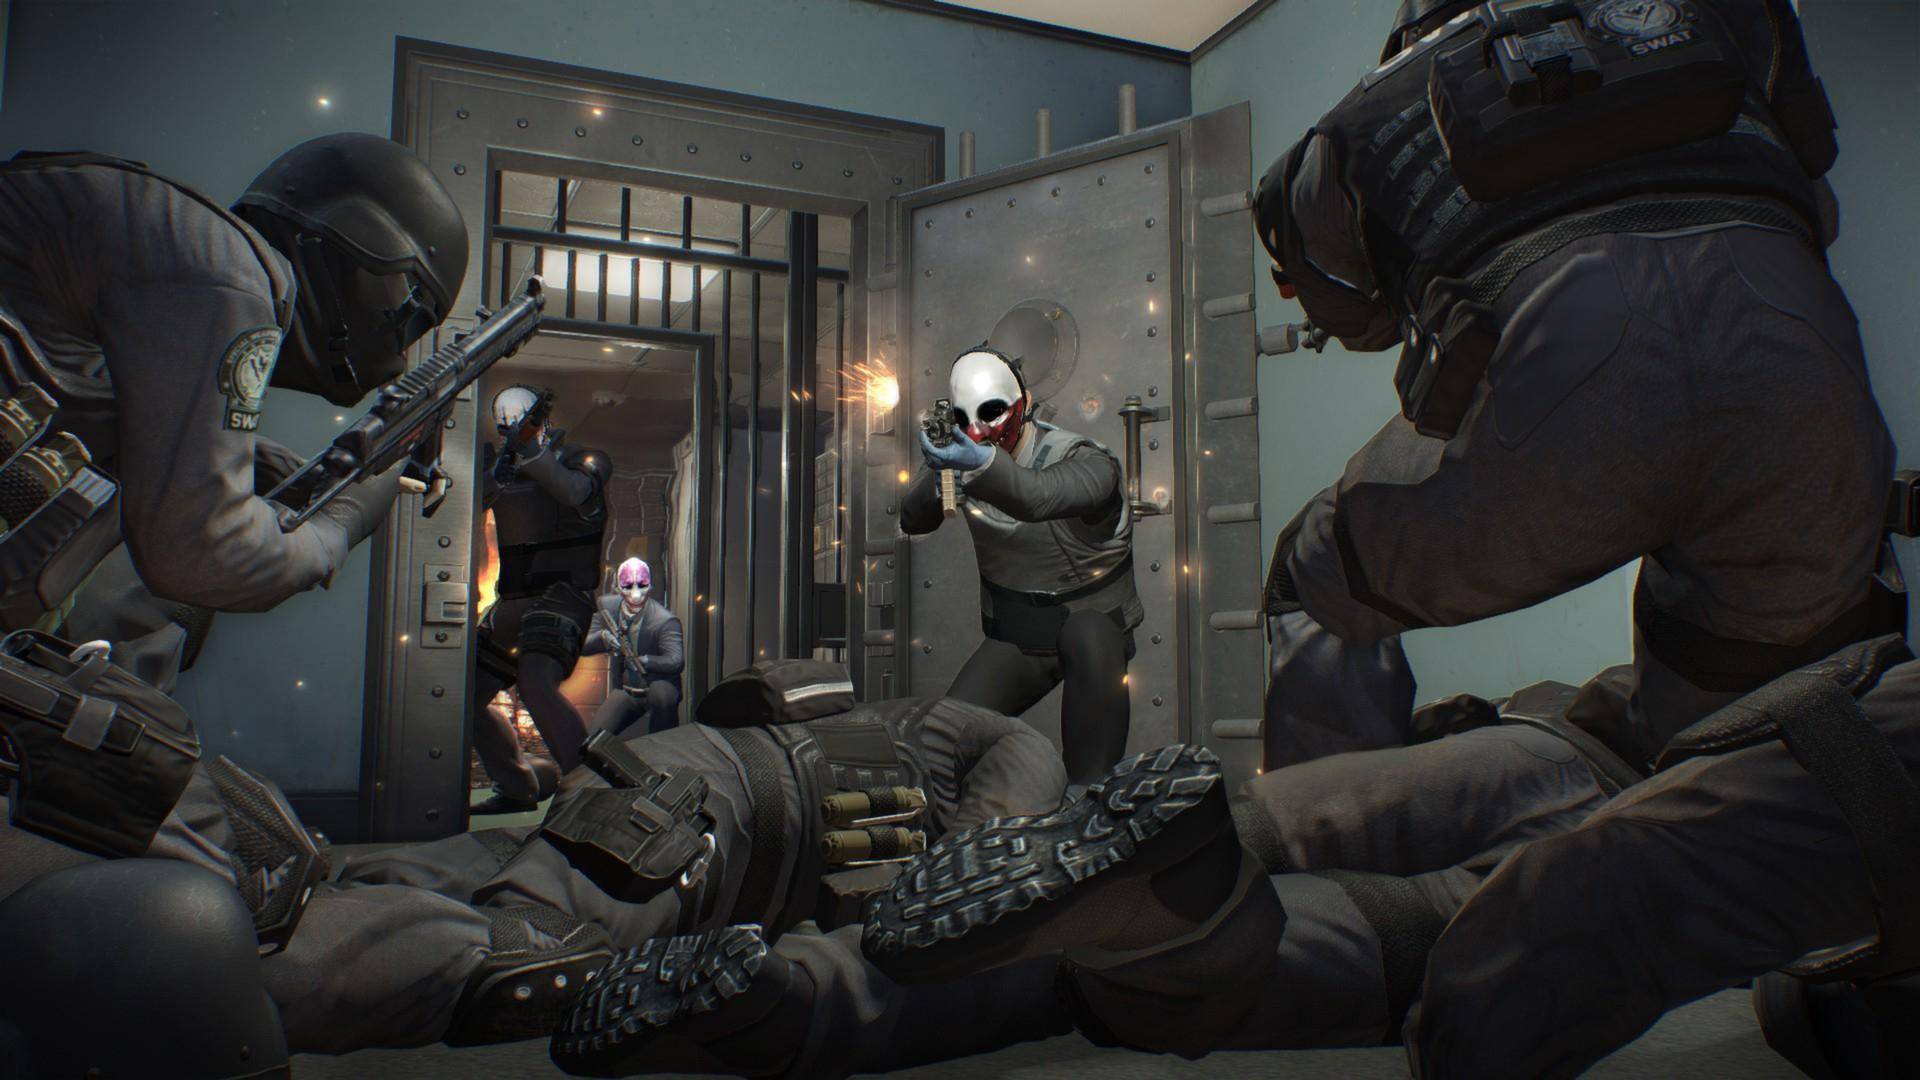 Payday 2 receives a new DLC this week